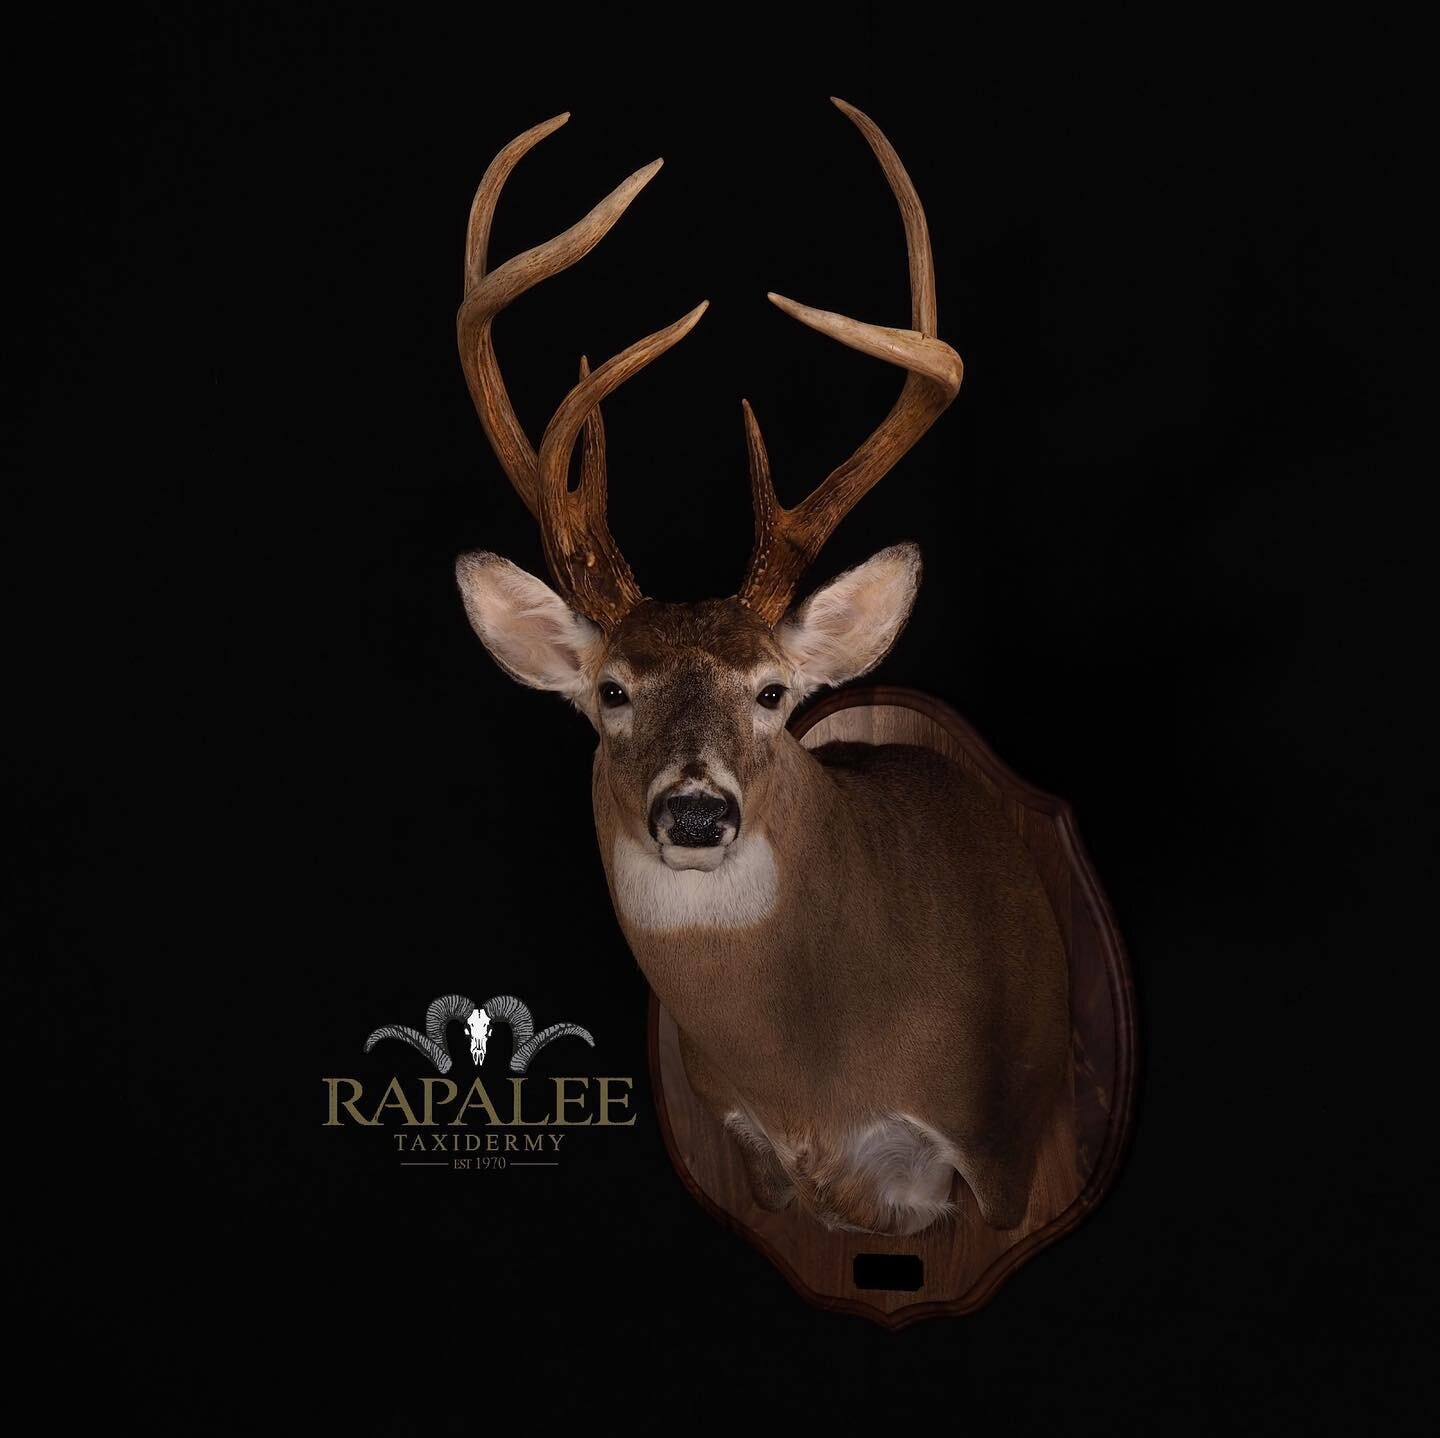 This beautiful buck is shown in a left turn semi sneak pose with a classic walnut panel. #rapaleetaxidermy #virginiataxidermy #virginiataxidermist #worldclasstaxidermy #deerhunting #virginiadeerhunting #deerhunt #huntdeer #huntvirginia